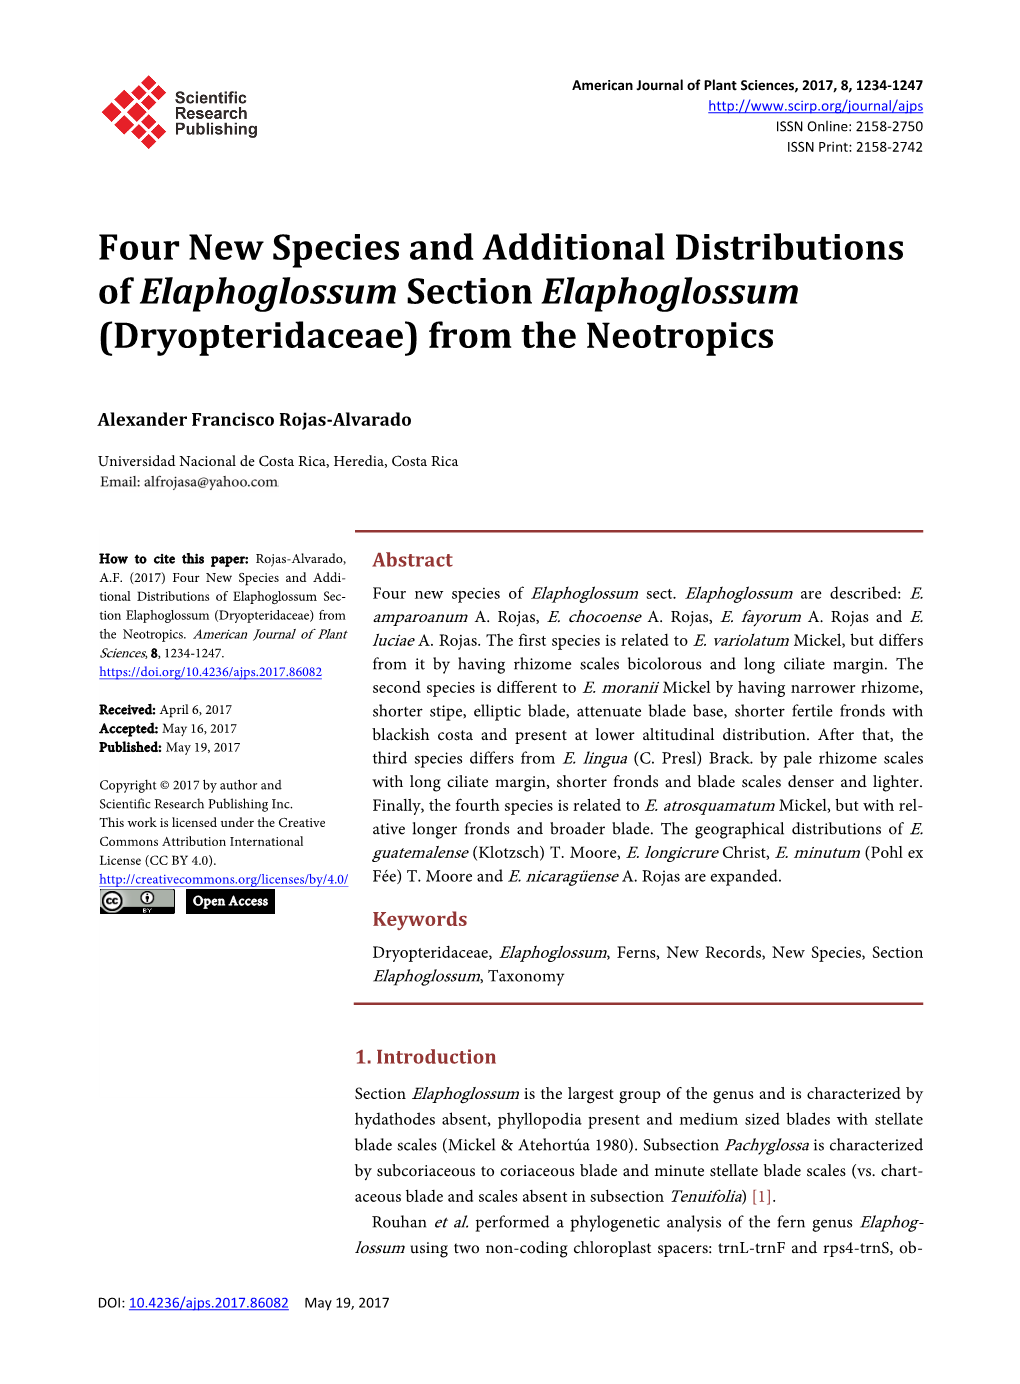 Four New Species and Additional Distributions of Elaphoglossum Section Elaphoglossum (Dryopteridaceae) from the Neotropics